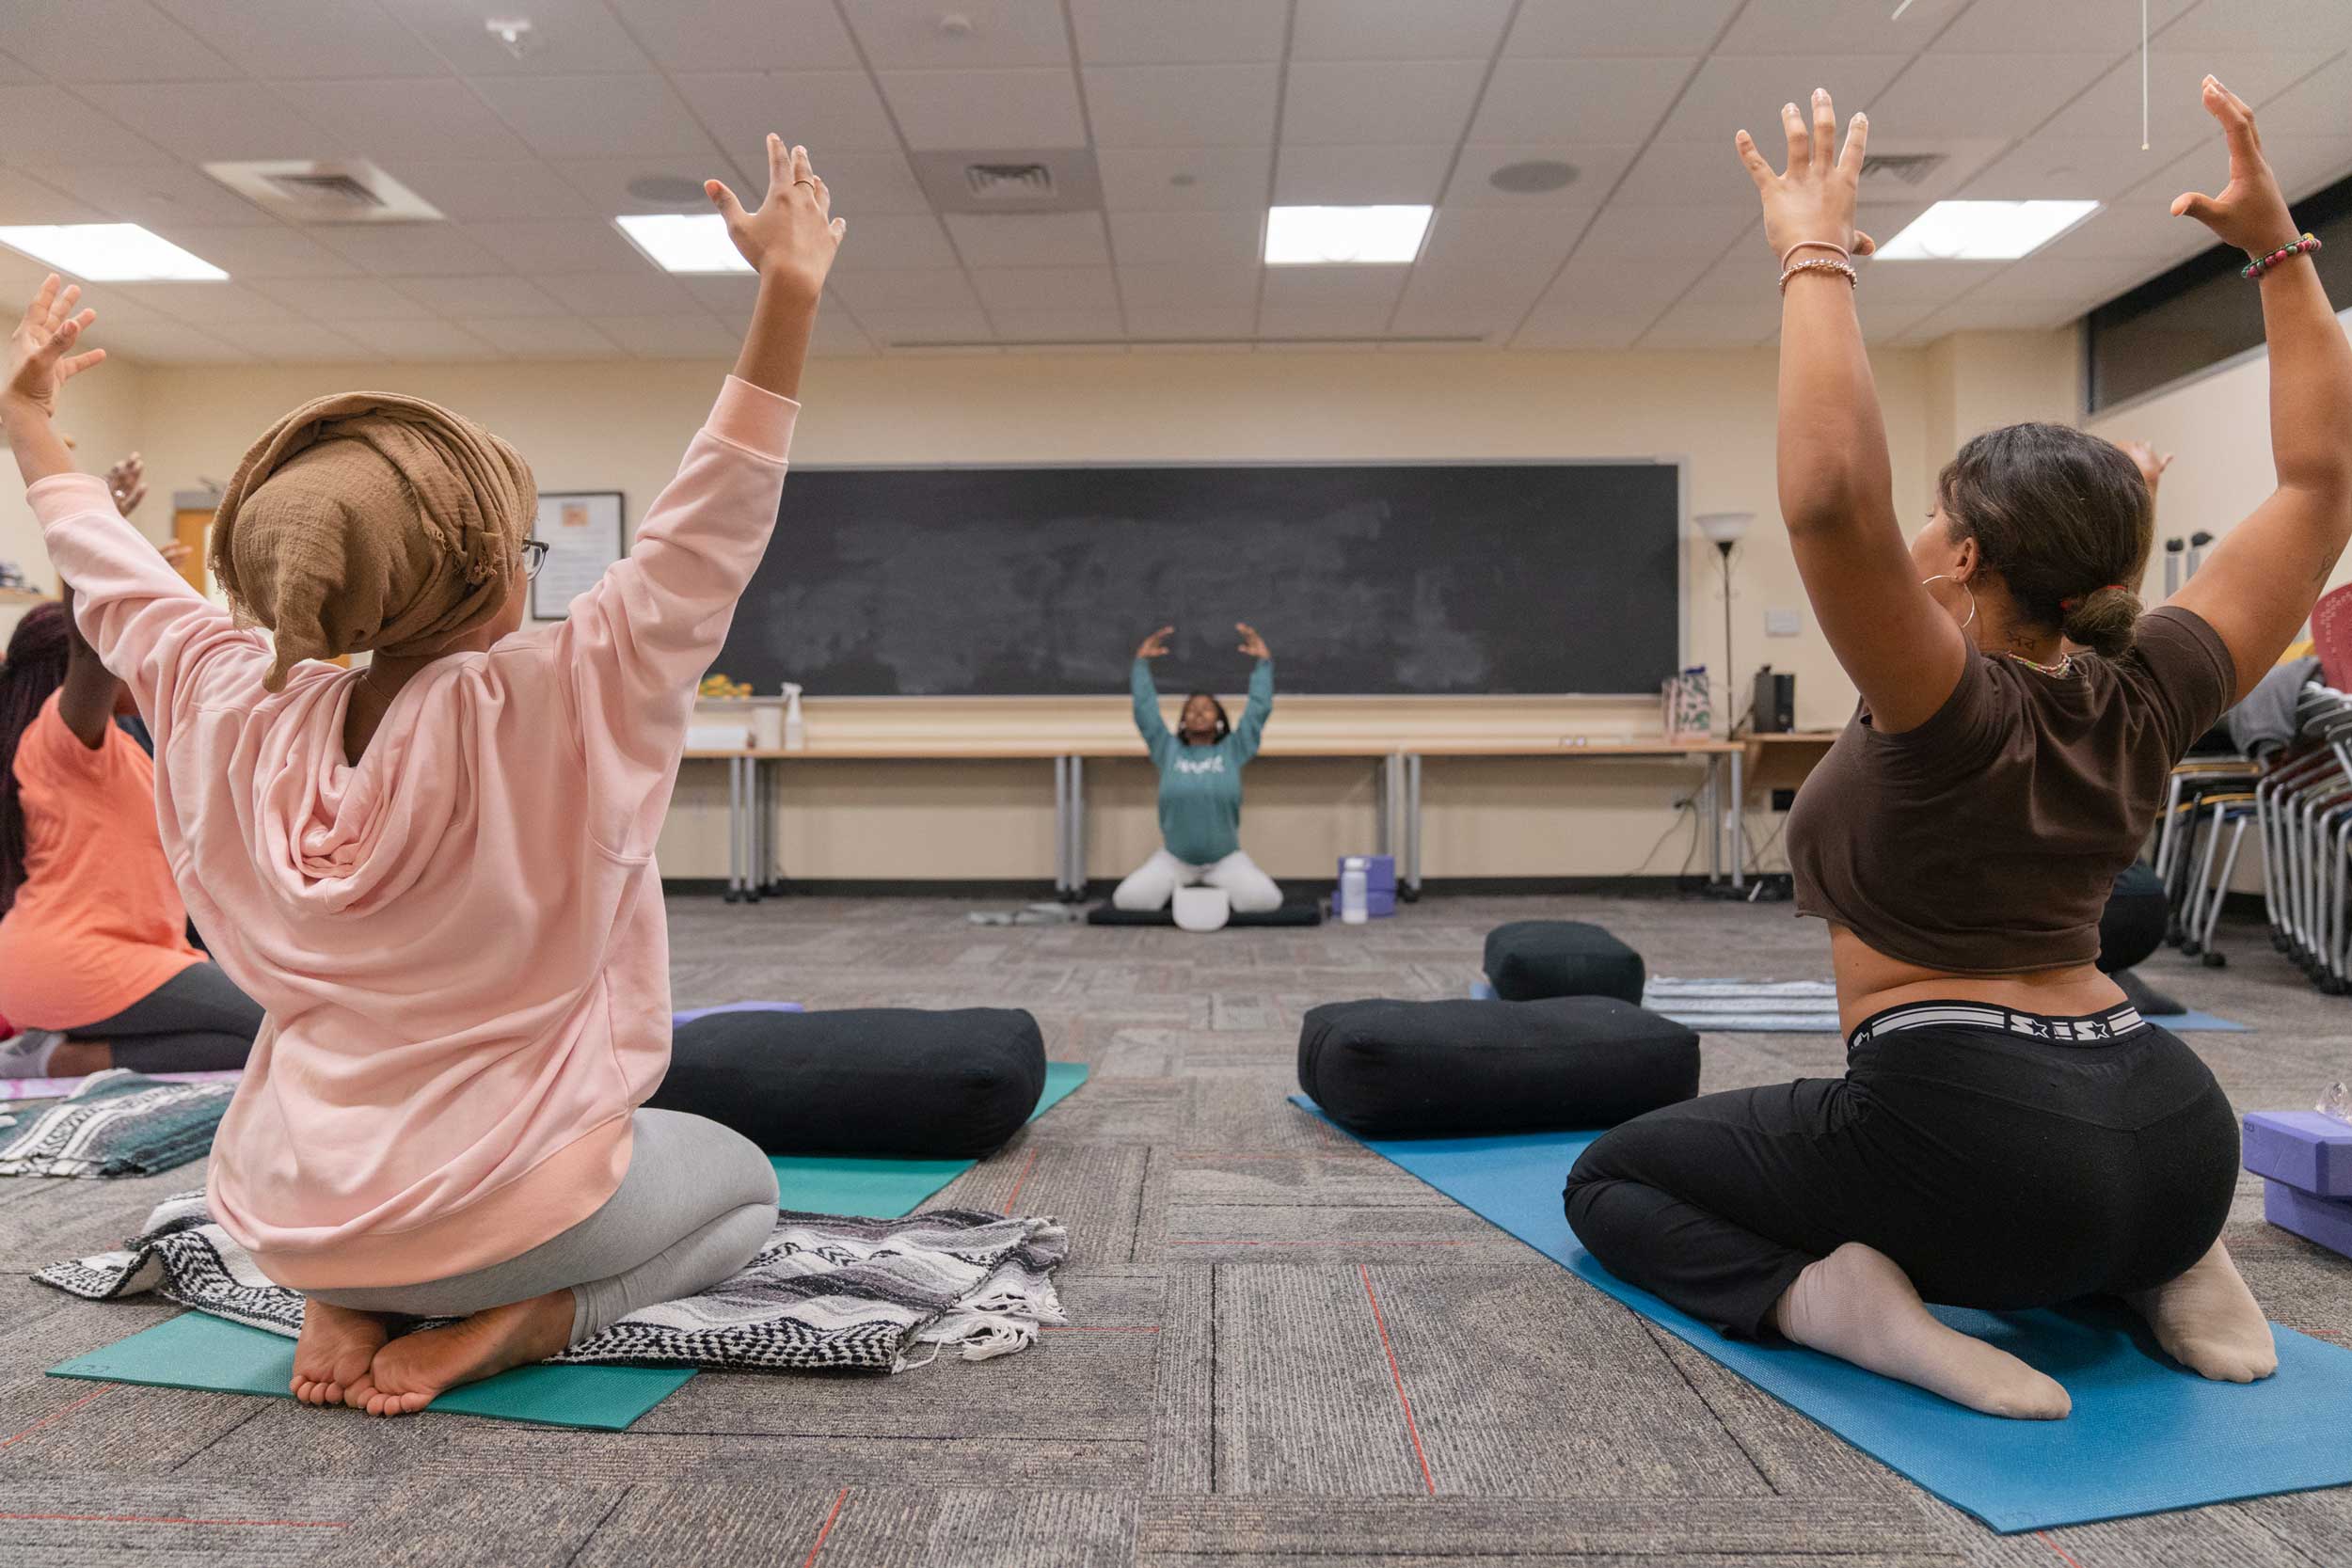 Women one their knees on yoga mats with their arms raised high in the air